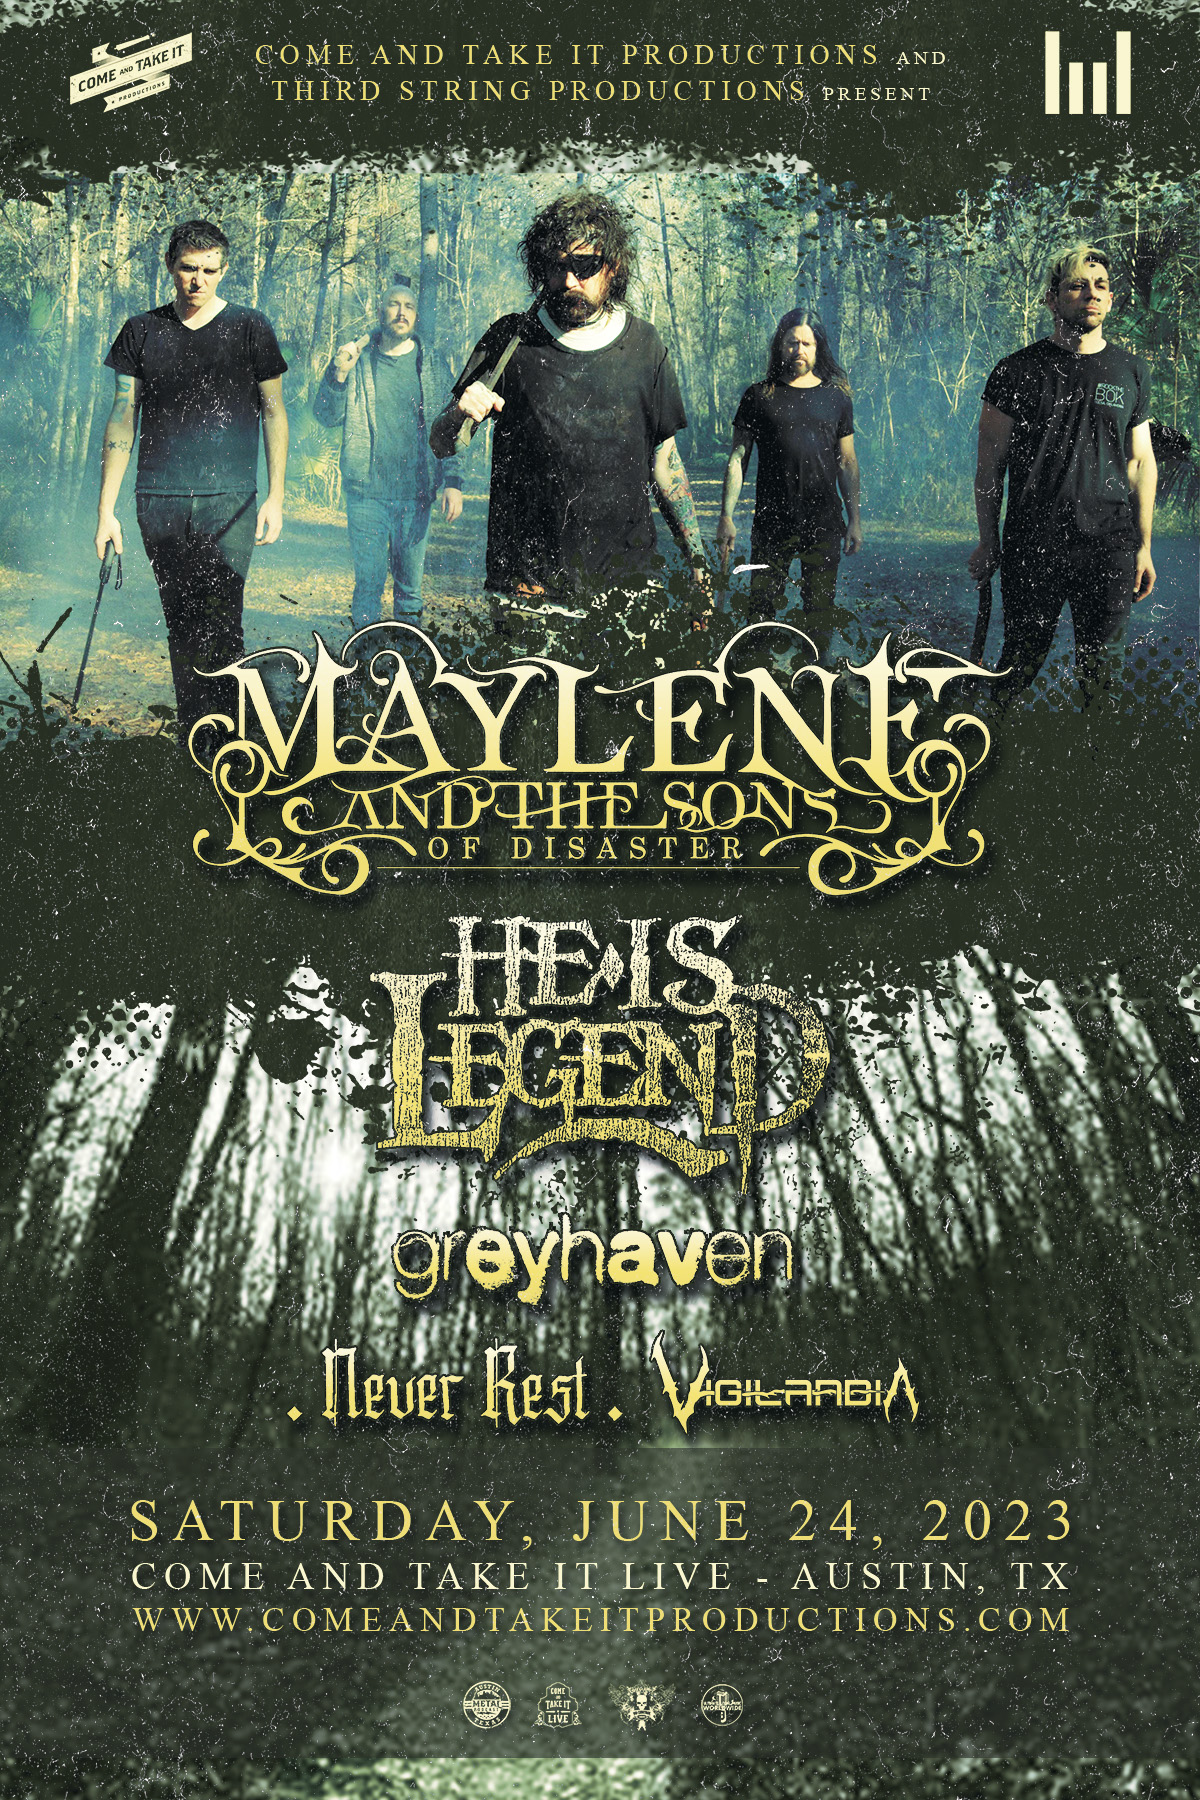 Maylene and The Sons of Disaster, He Is Legend, Greyhaven and more